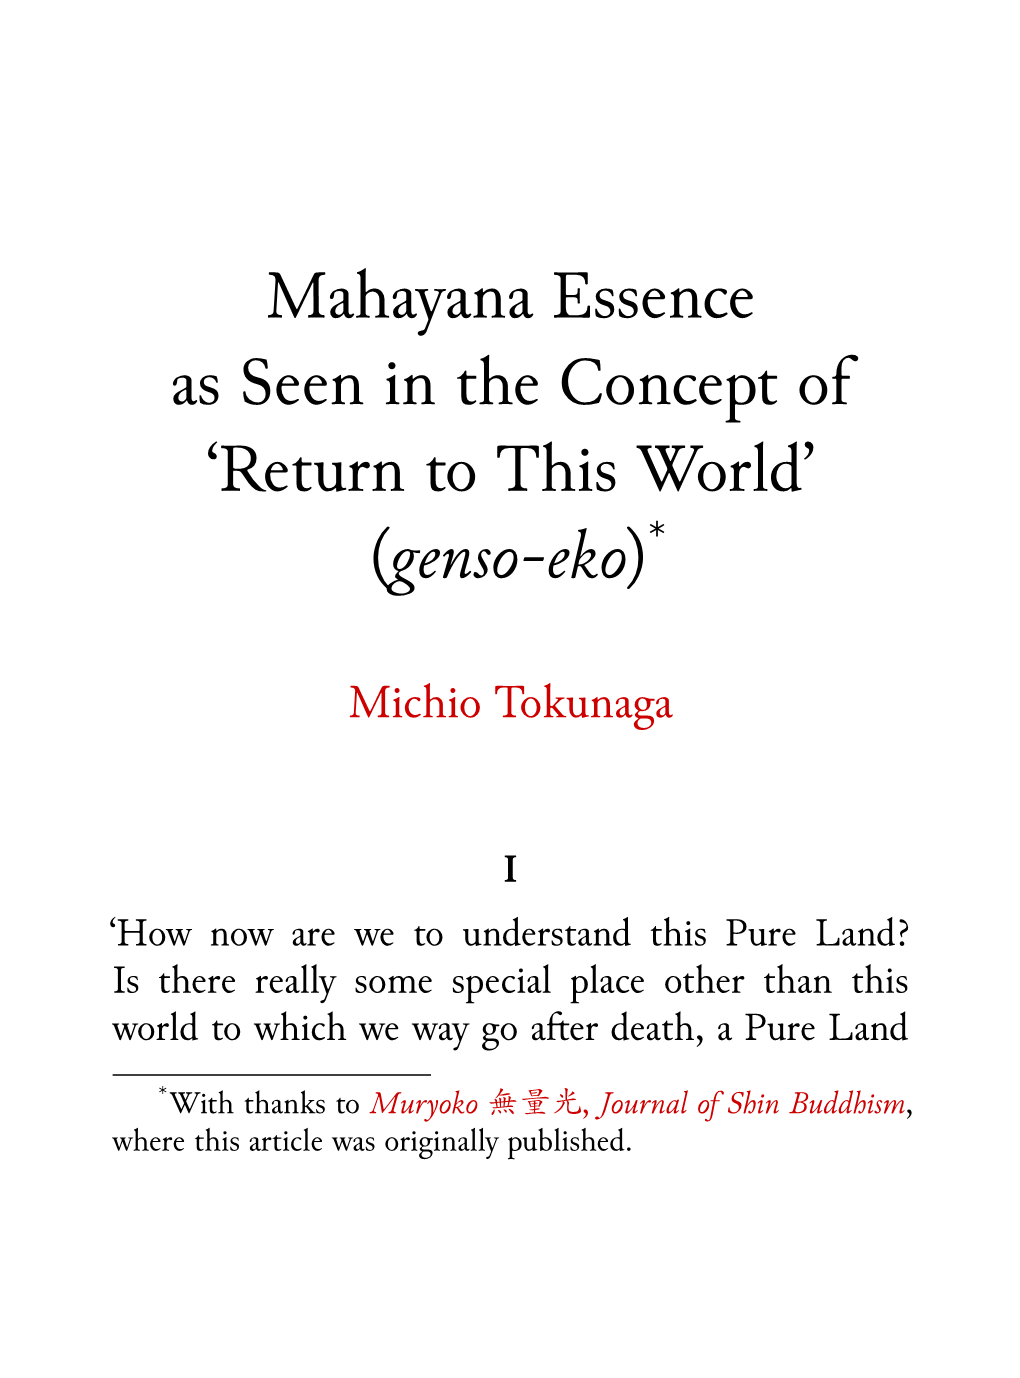 Mahayana Essence As Seen in the Concept of 'Return to This World'